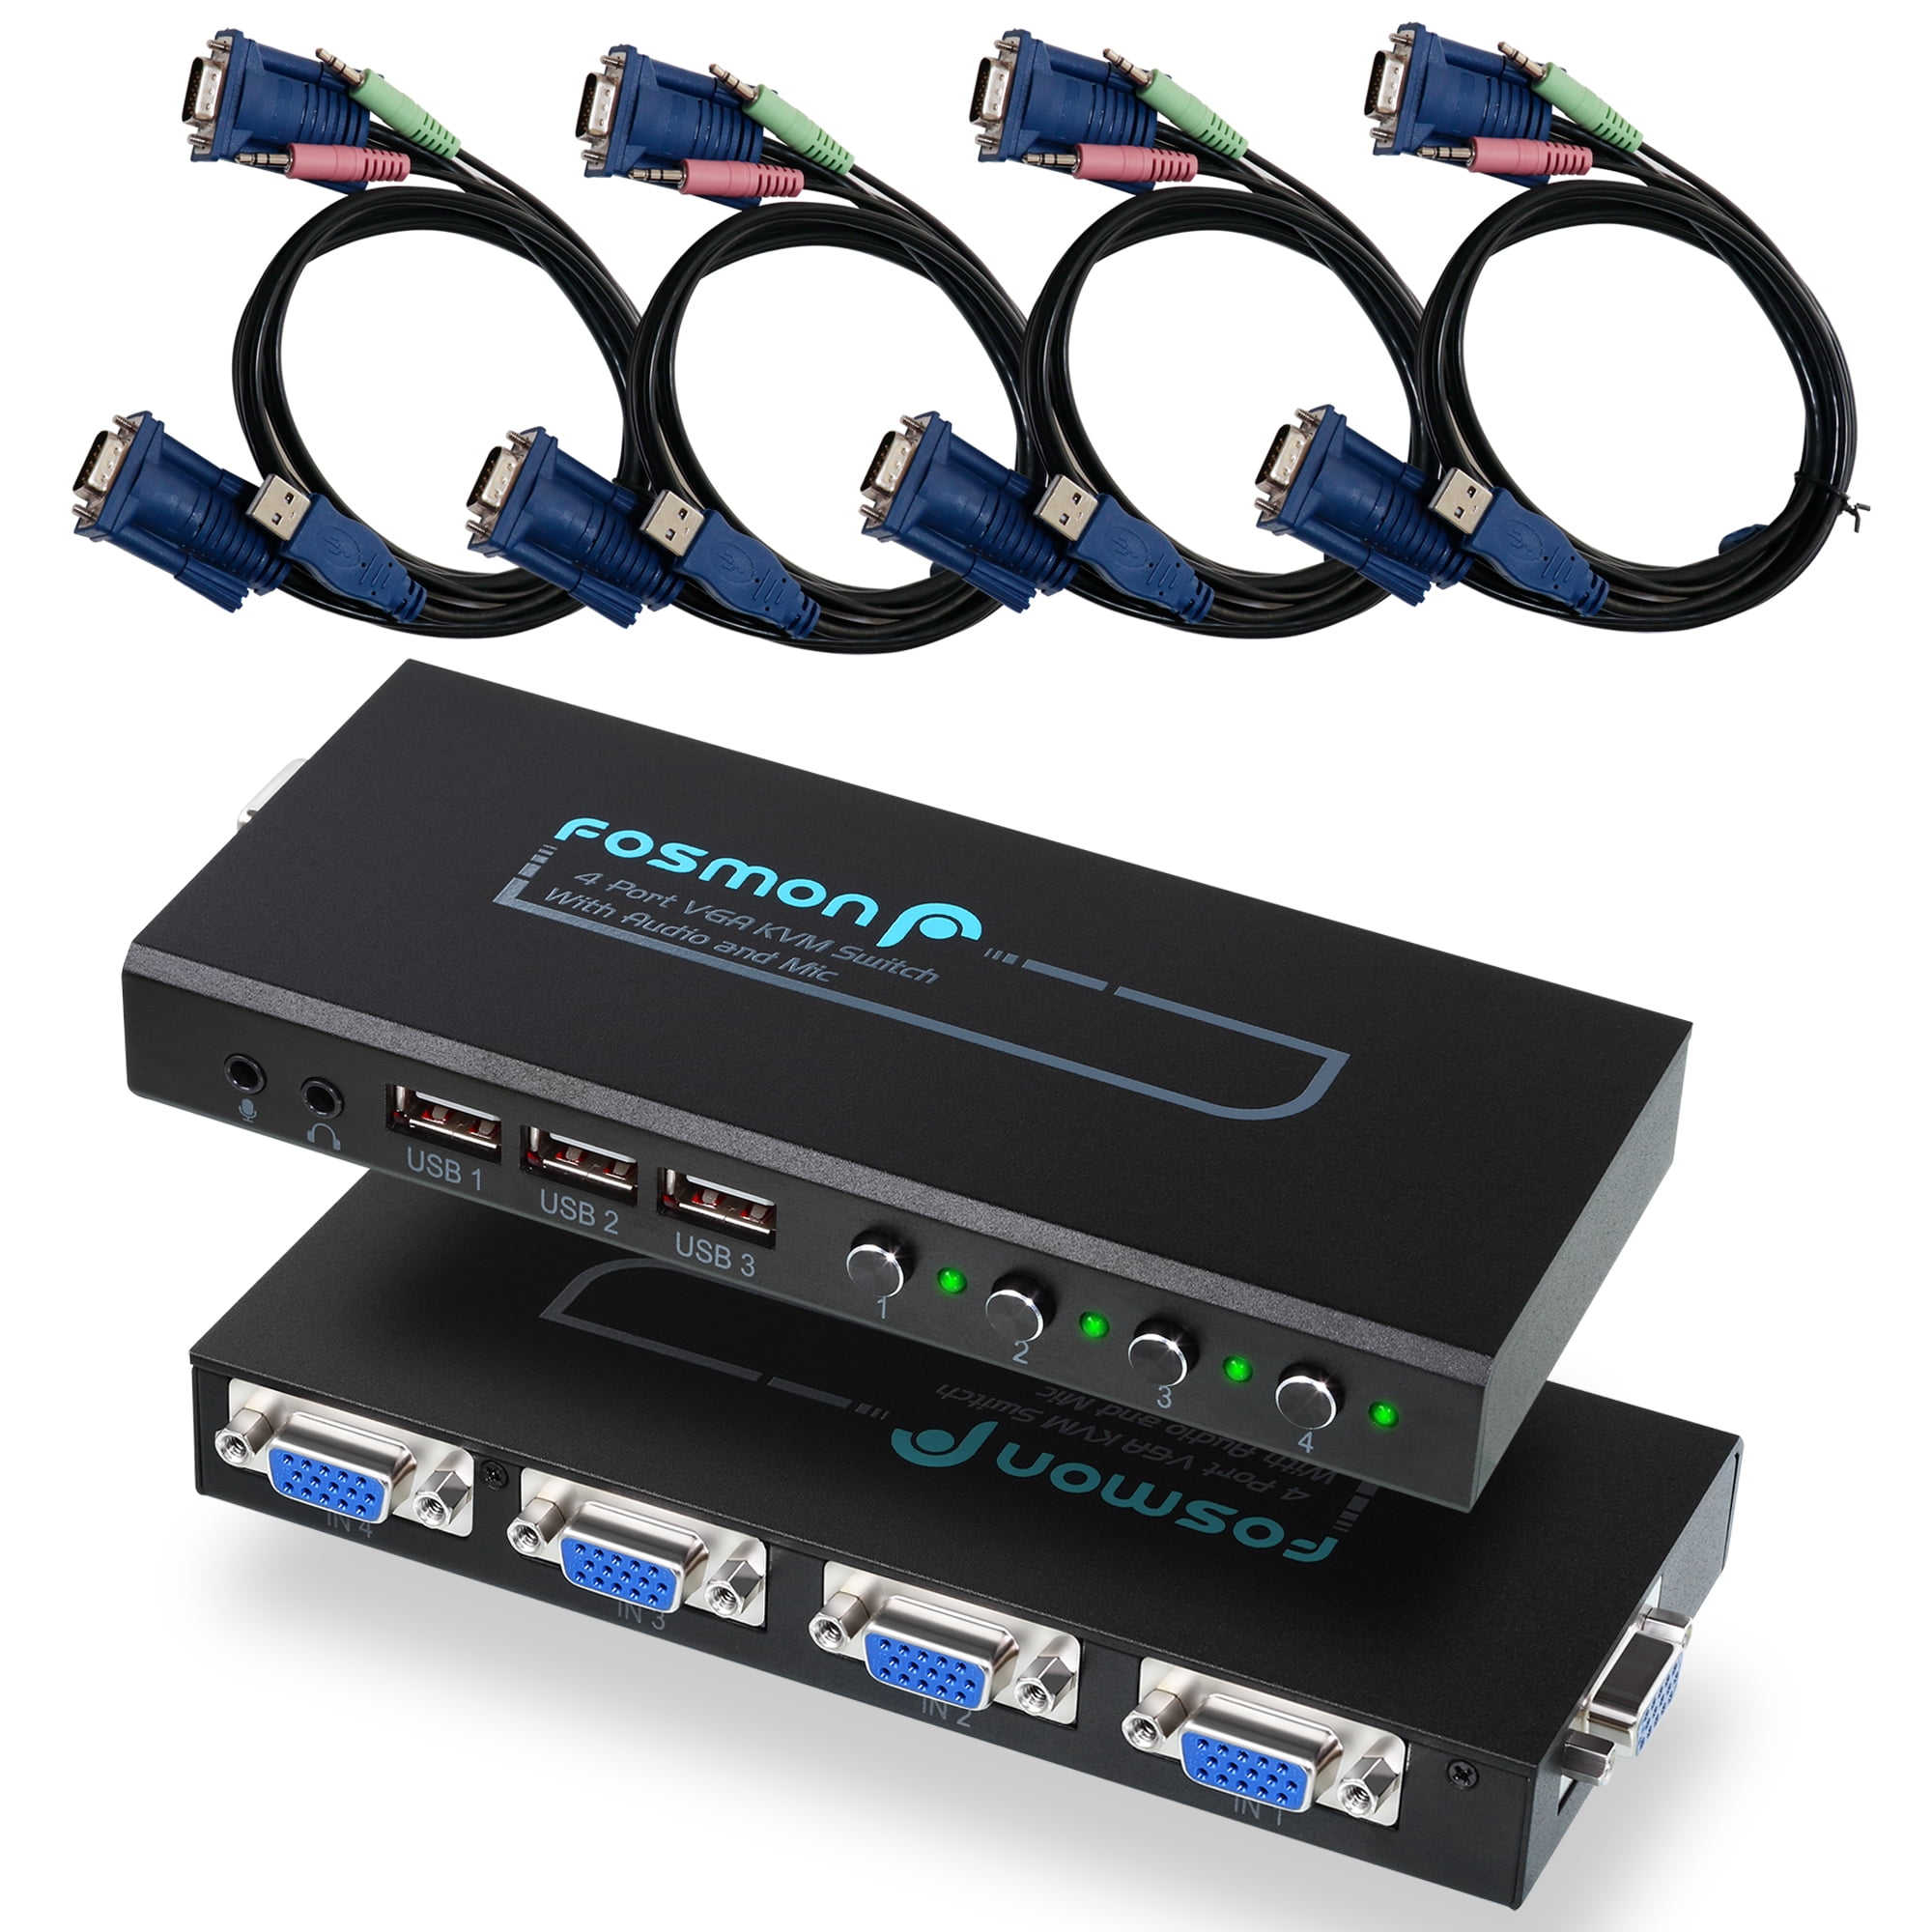 Fosmon 4-Port VGA KVM Switch, 3 USB Hubs, 1 Audio Output, 4 VGA Cables, (2048x1536@500MHz with DDC) Share 4 Computers with 1 Monitor and 3 USB Devices Mouse Keyboard for PC Laptop - Walmart.com